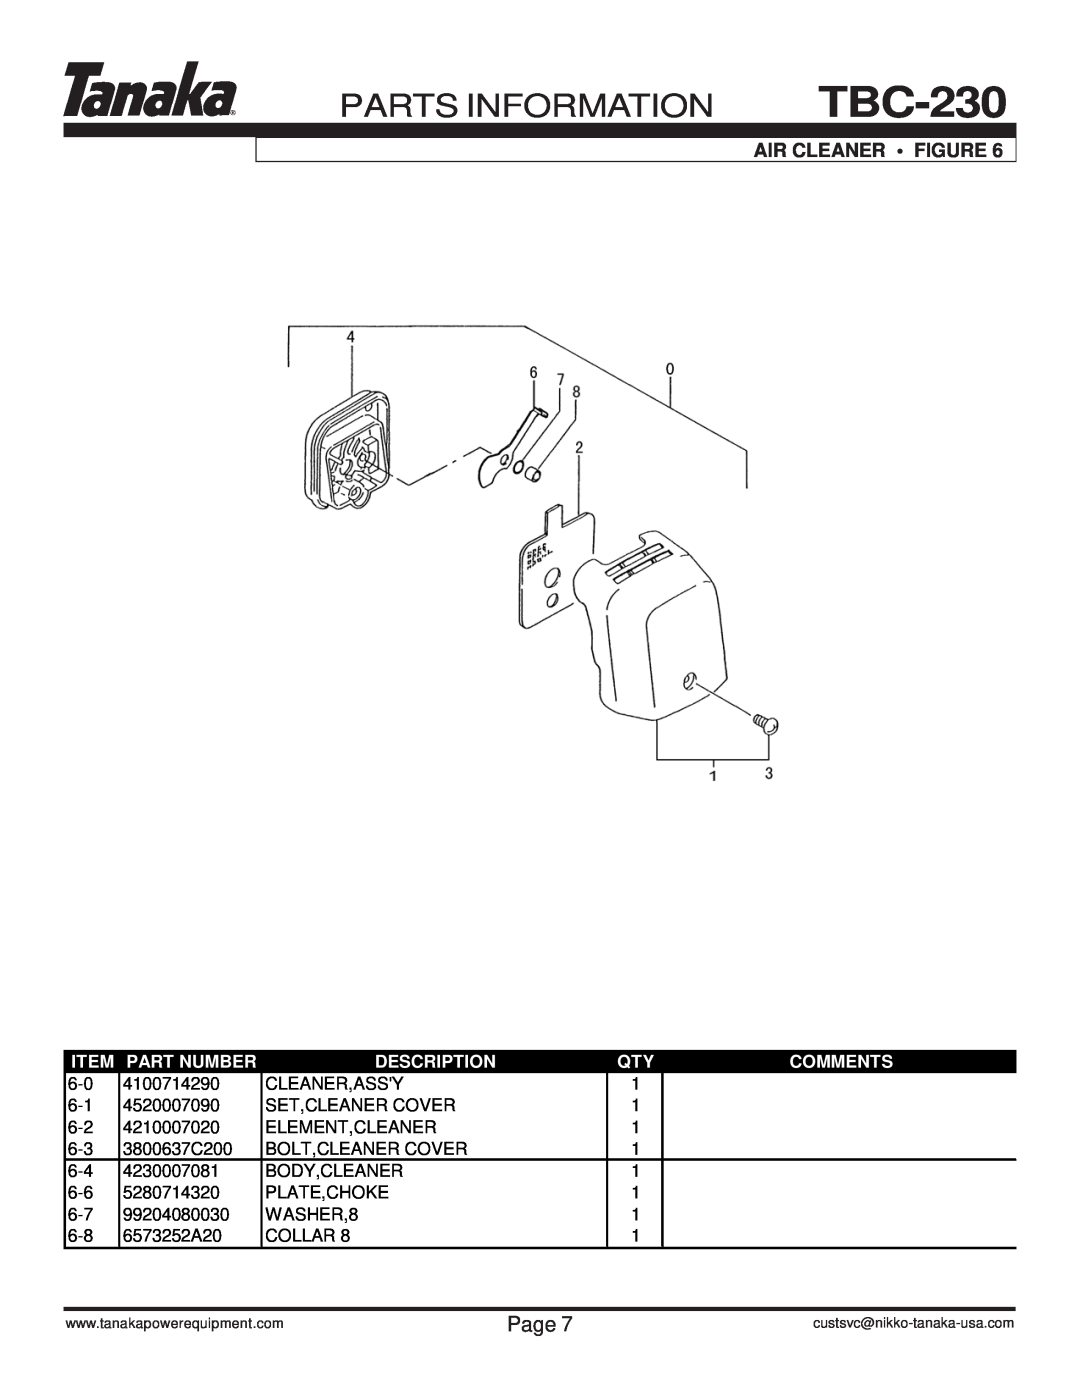 Tanaka TBC-230 manual Parts Information, Page, Air Cleaner Figure, Part Number, Description, Comments 